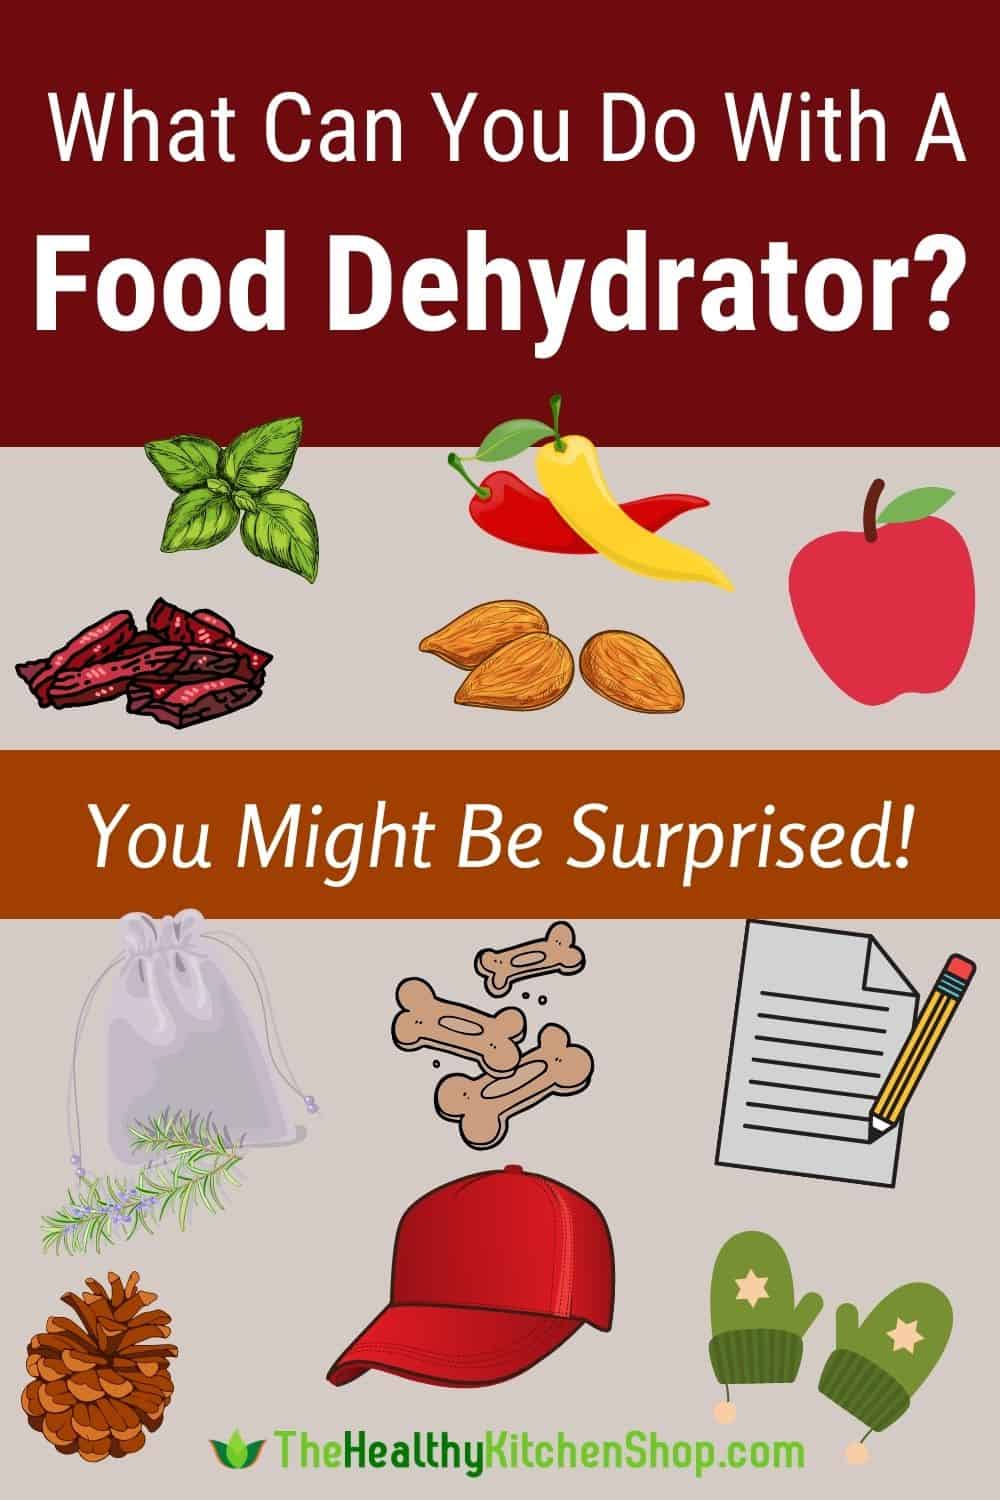 What can you do with a food dehydrator?